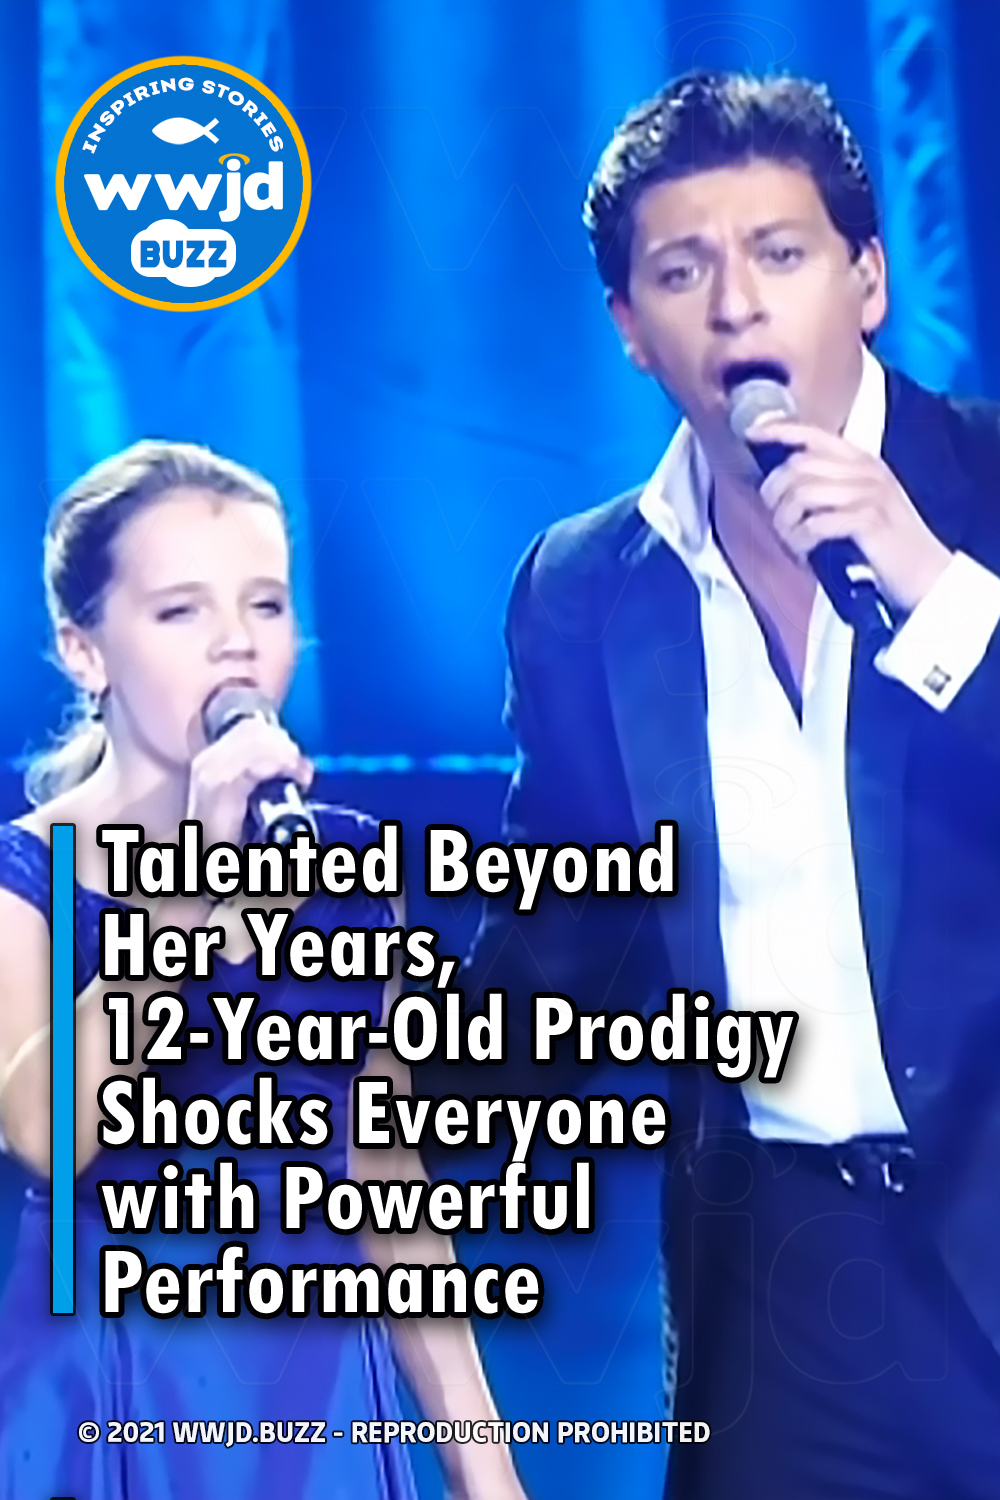 Talented Beyond Her Years, 12-Year-Old Prodigy Shocks Everyone with Powerful Performance